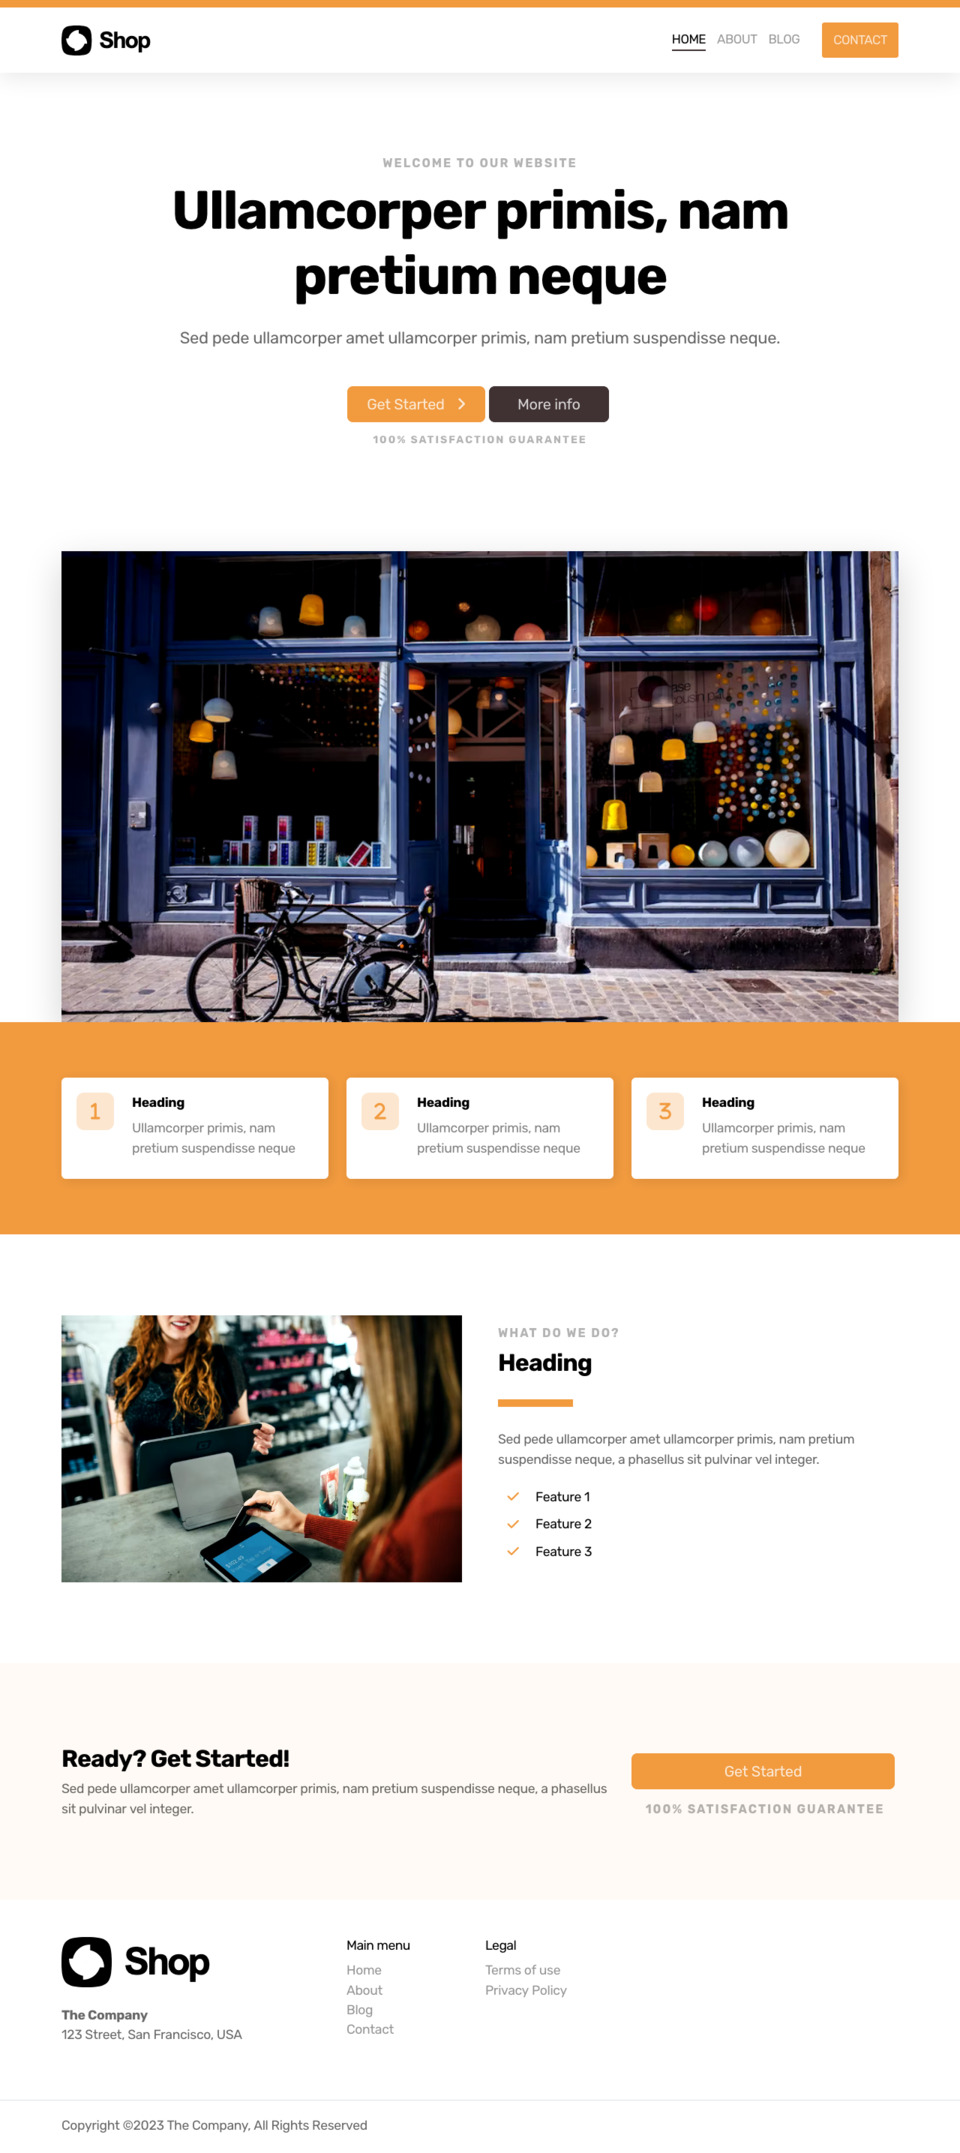 Shop Website Template - Ideal for small business owners, boutique owners, retail shops, e-commerce startups, and anyone looking to launch an online store quickly and effortlessly.